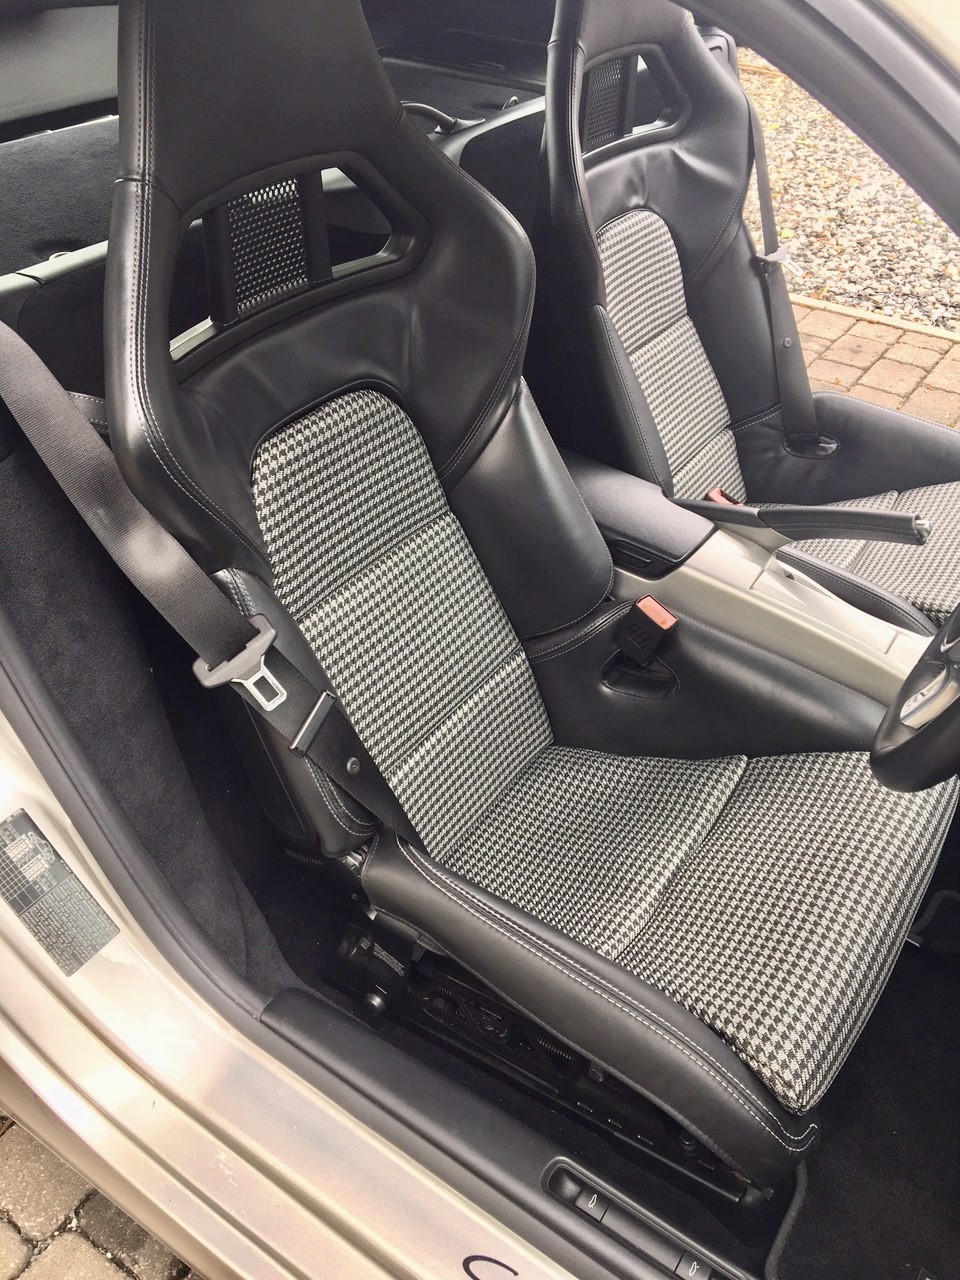 Pistonheads - The image showcases the interior of a sports car, specifically focusing on its driver's seat. The seat is adorned with a black and white checkered pattern, indicative of a racing or rally theme. The material appears to be suede, adding to the sporty aesthetic of the vehicle. 

The car is currently parked indoors, as evidenced by the white wall in the background and a section of wooden flooring visible on the left side. A black seat belt is prominently displayed across the middle of the seat. The overall setting suggests that the car might be a showcase or a model for potential buyers, given its pristine condition and meticulous arrangement.